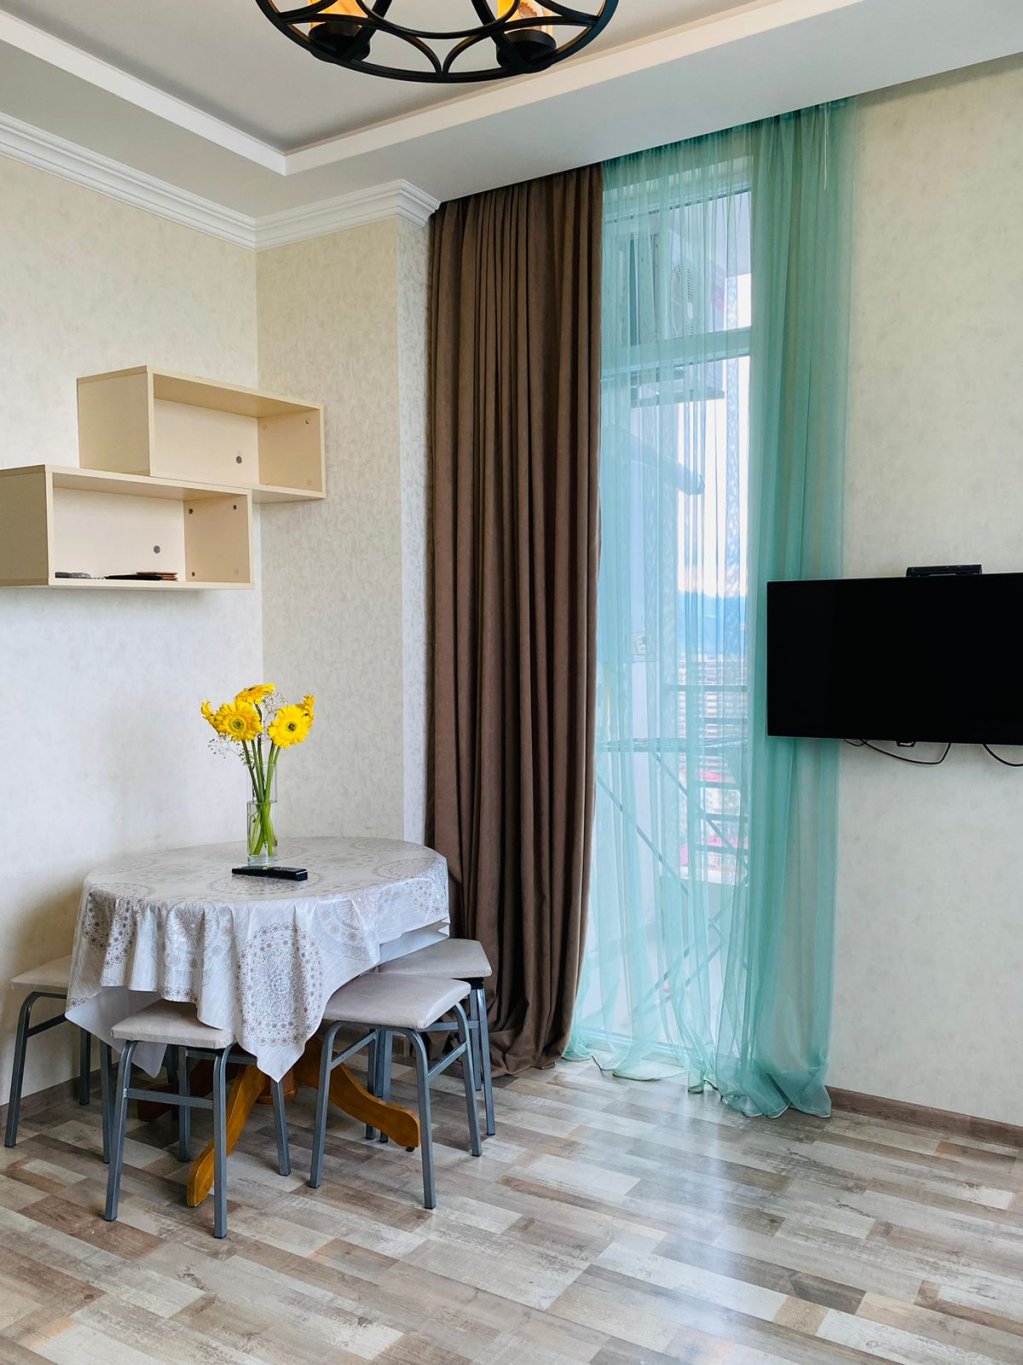 1-bedroom apartment "Nice" with sea view id-1056 -  rent an apartment in Batumi